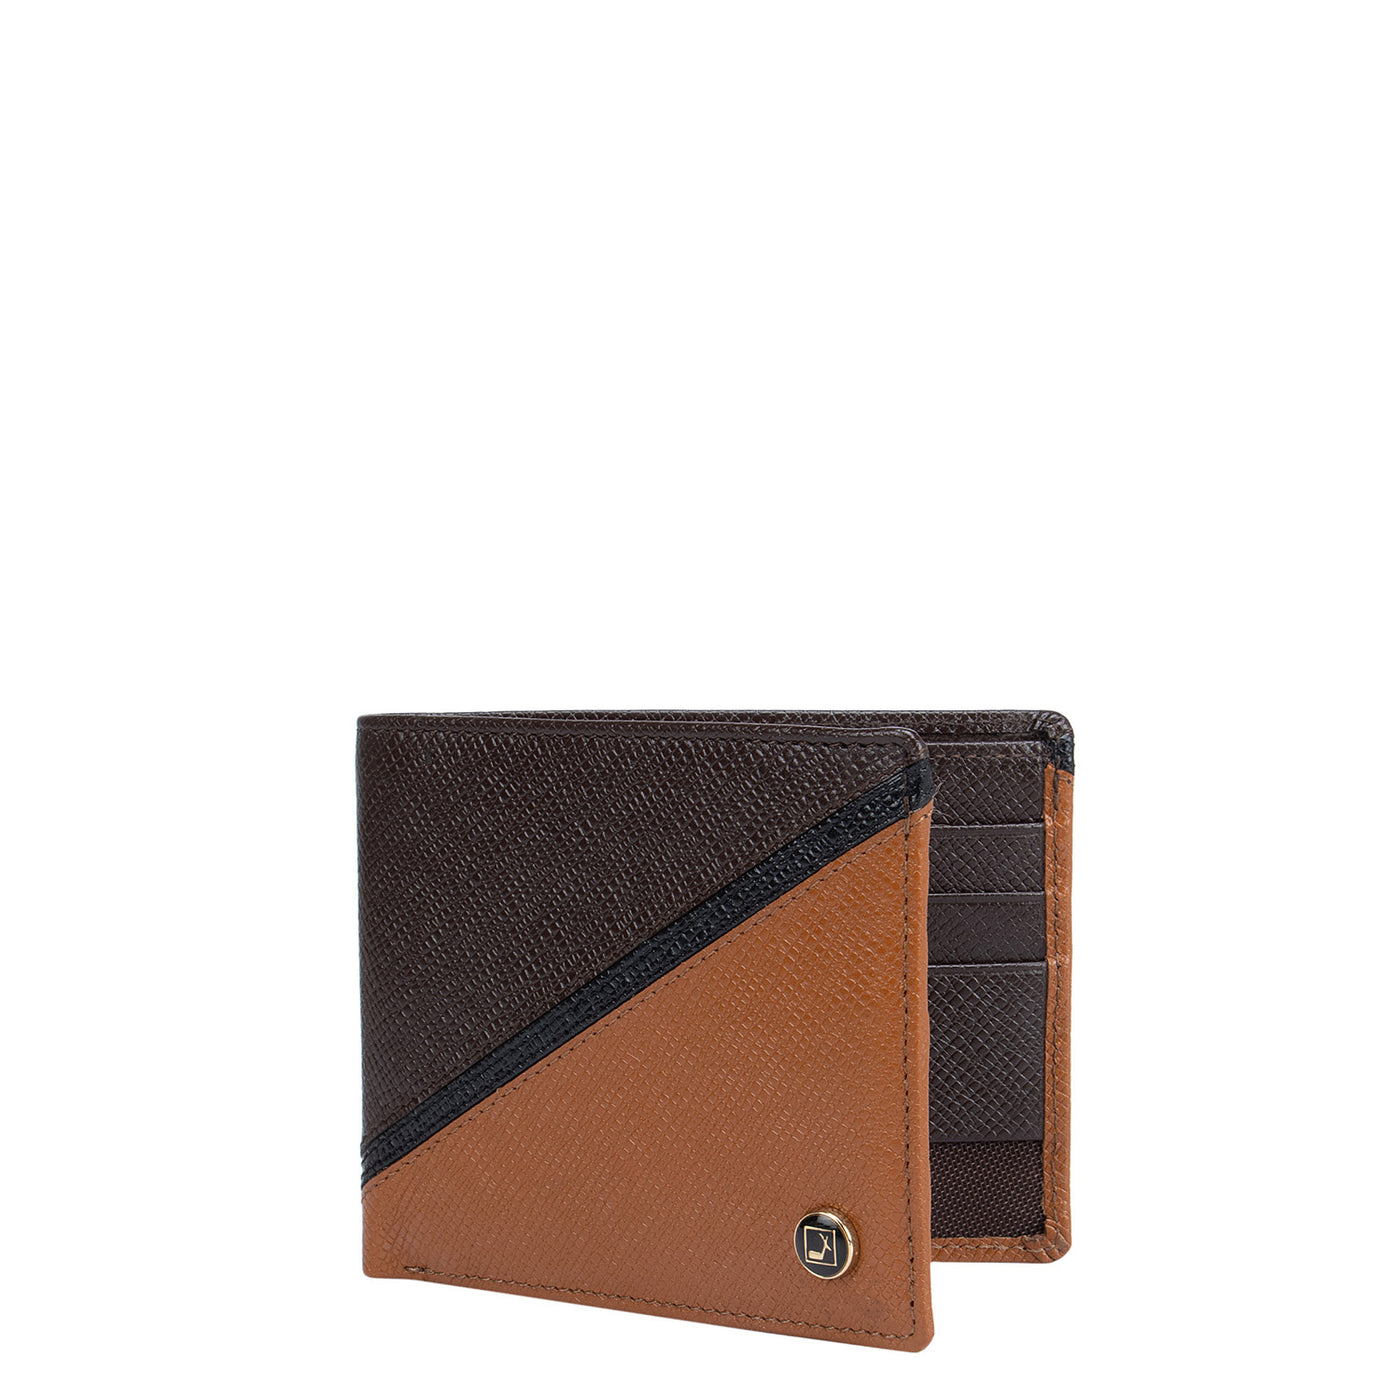 Franzy Leather Mens Wallet - Chocolate & Cognac